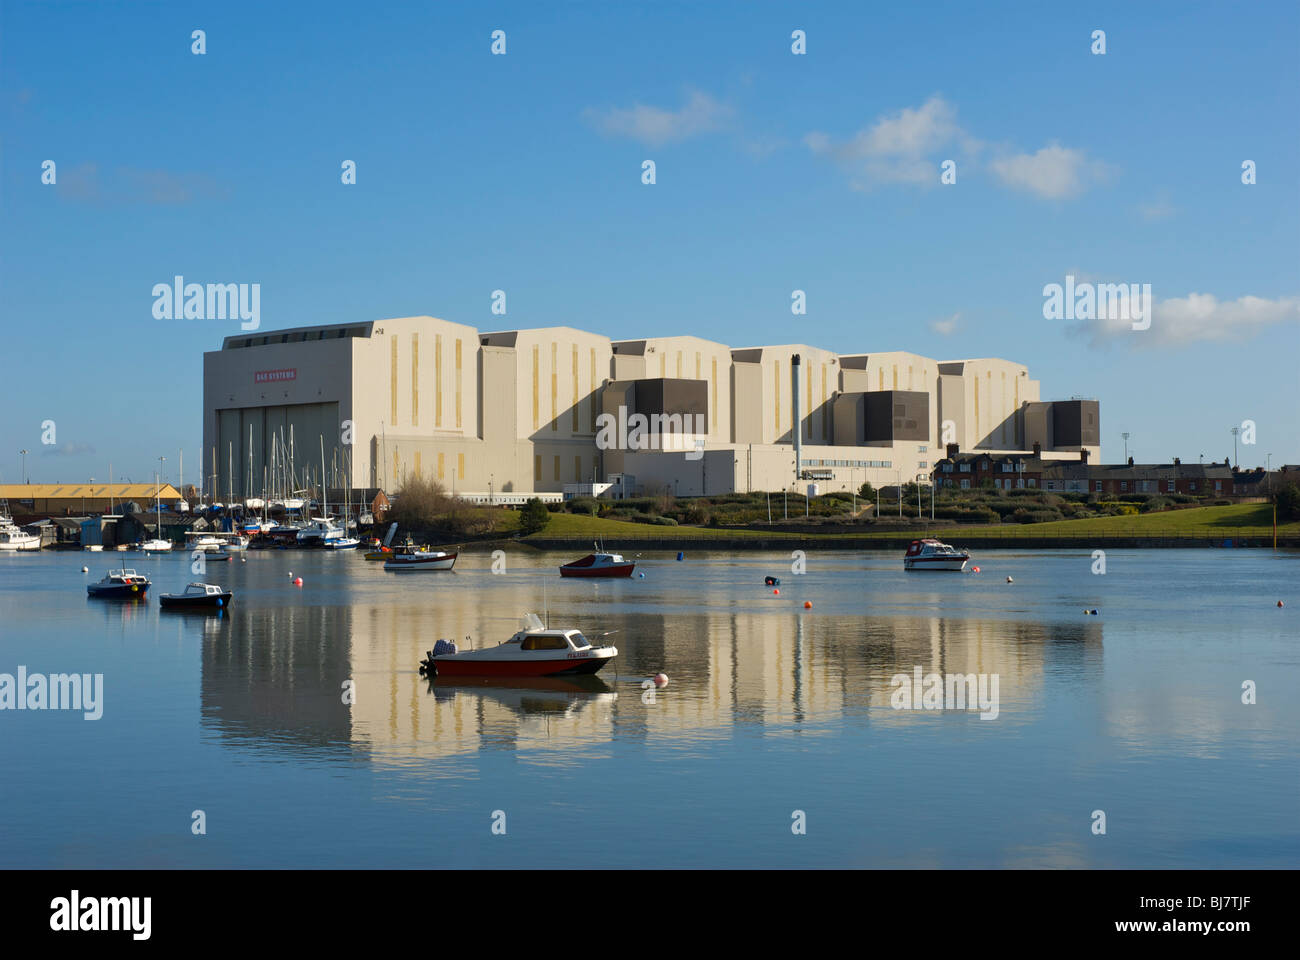 BAE Systems and Walney Channel, Barrow-in-Furness, Cumbria, England UK Stock Photo